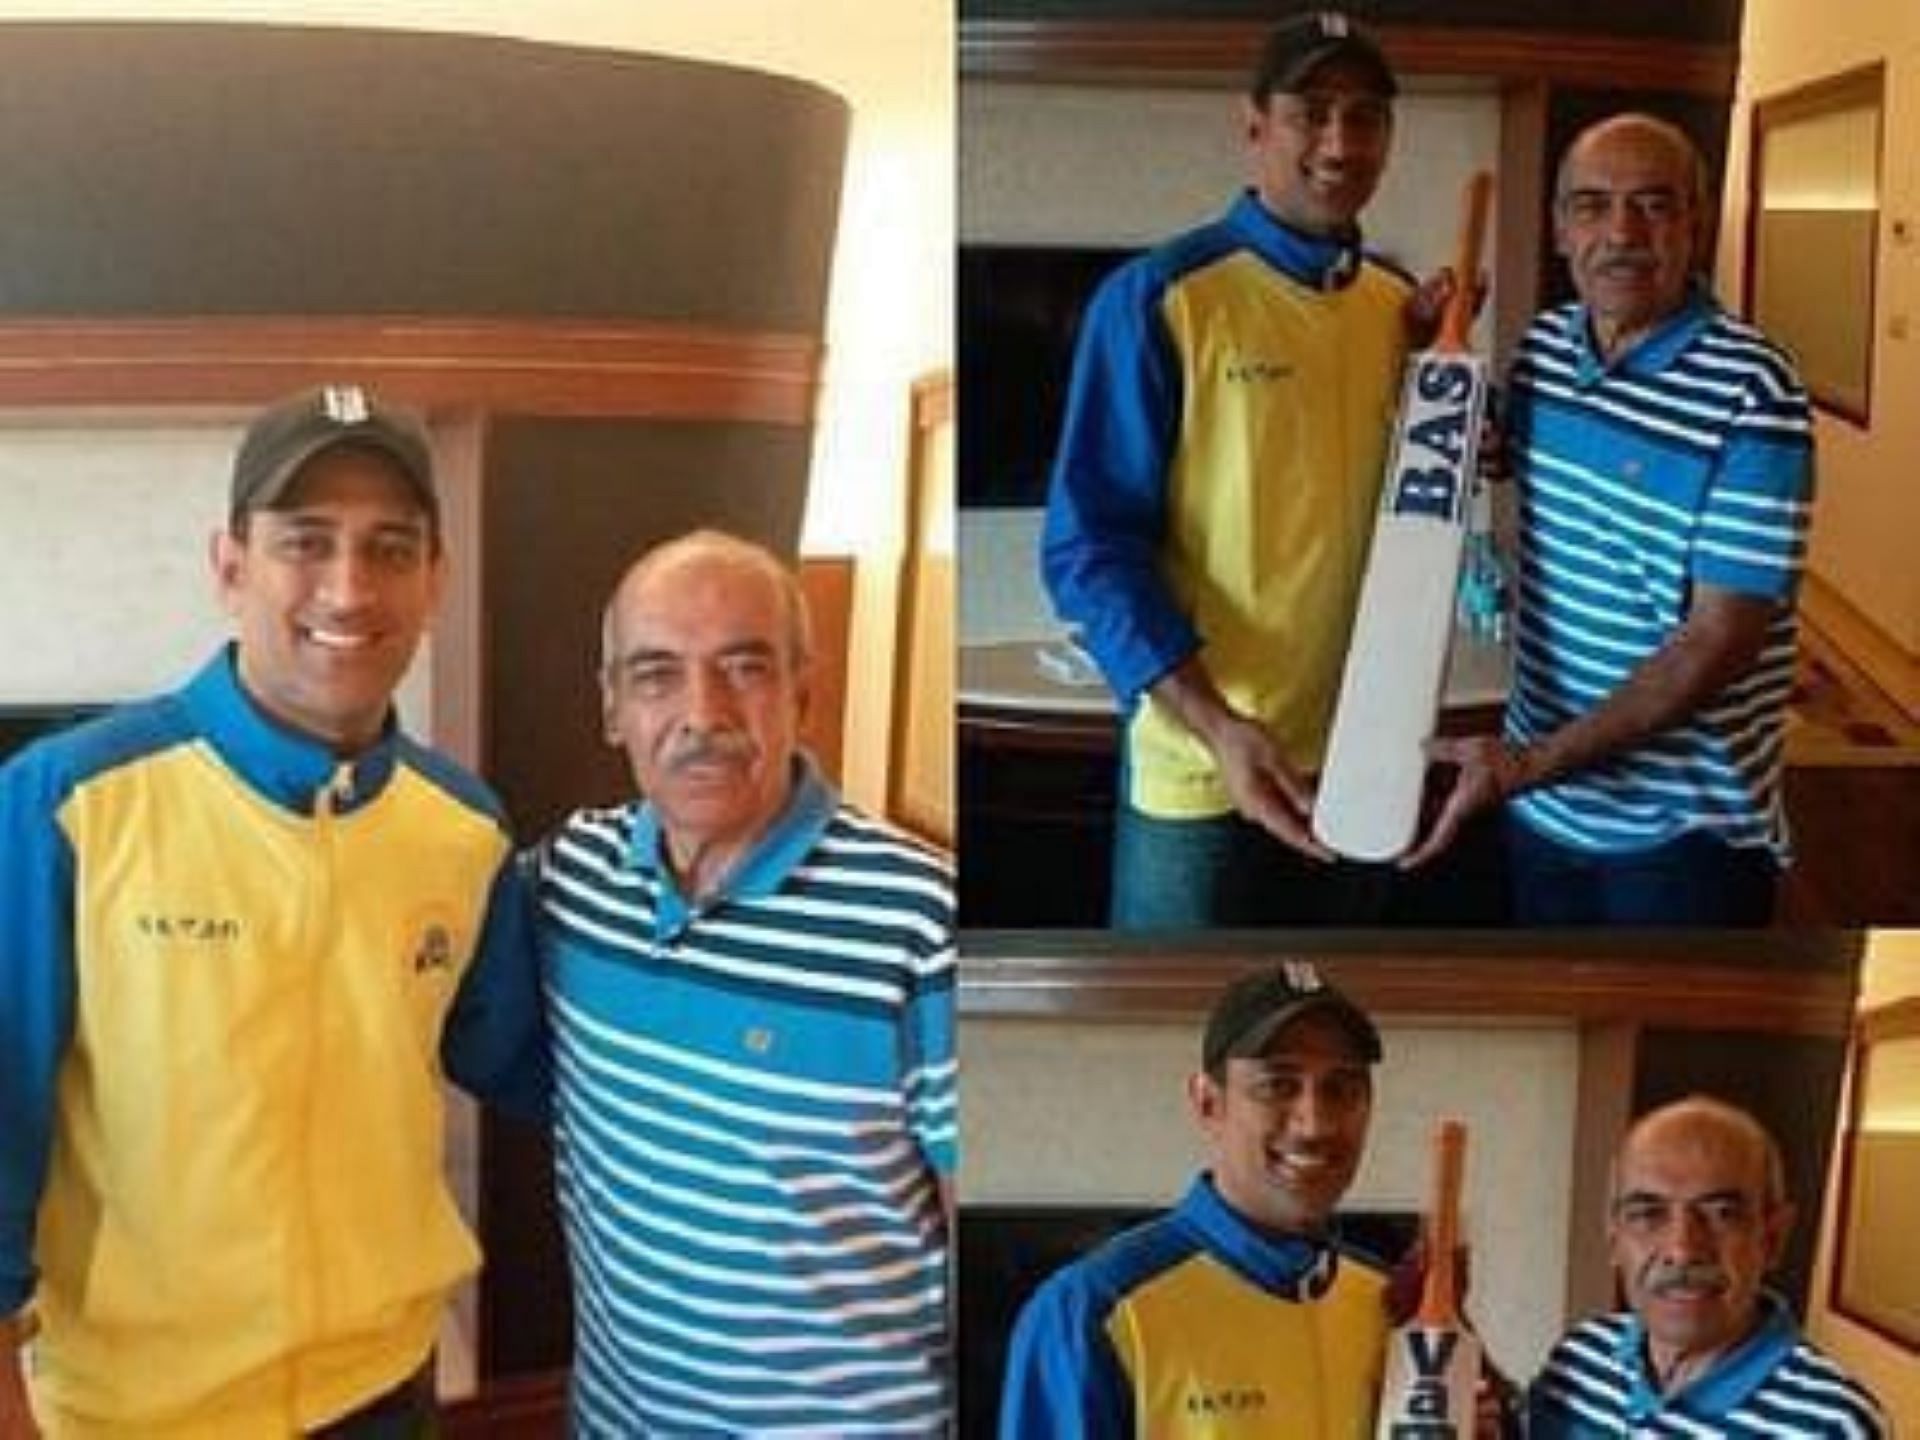 Dhoni&#039;s friend Paramjit Singh convinced the owner of BAS, Mr. Somi Kohli to sponsor the cricketing kit of the 17-year old MS Dhoni.